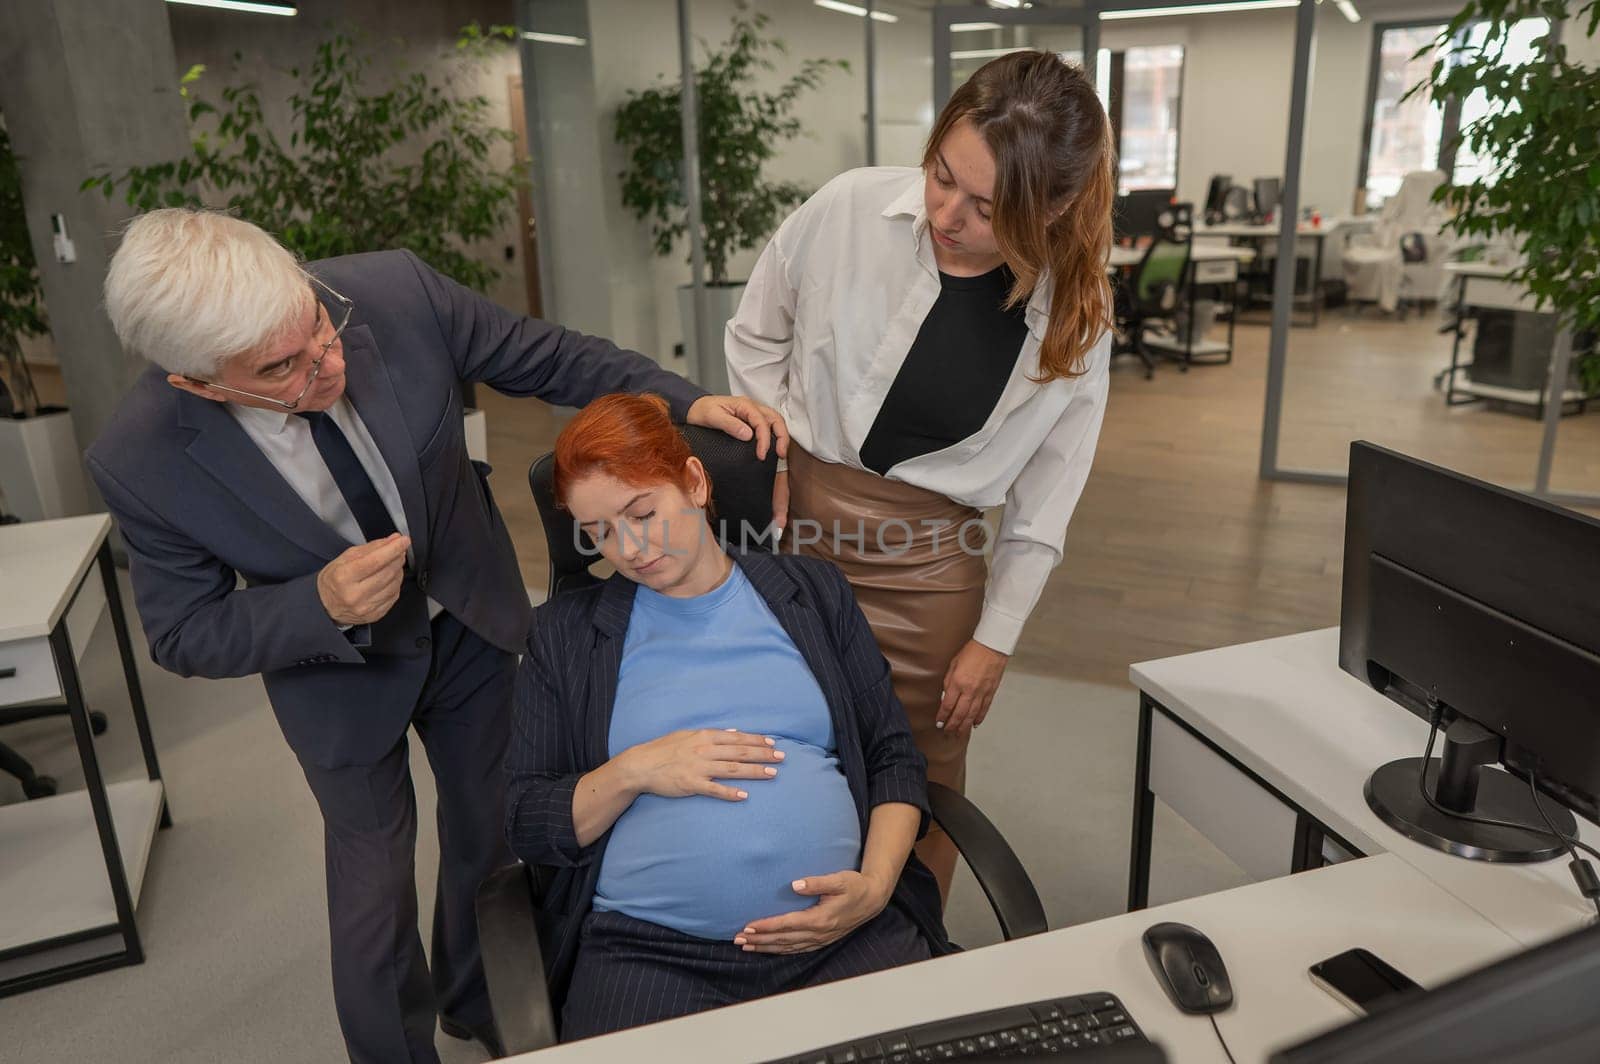 An elderly Caucasian man and woman look disapprovingly at their sleeping pregnant colleague in the office